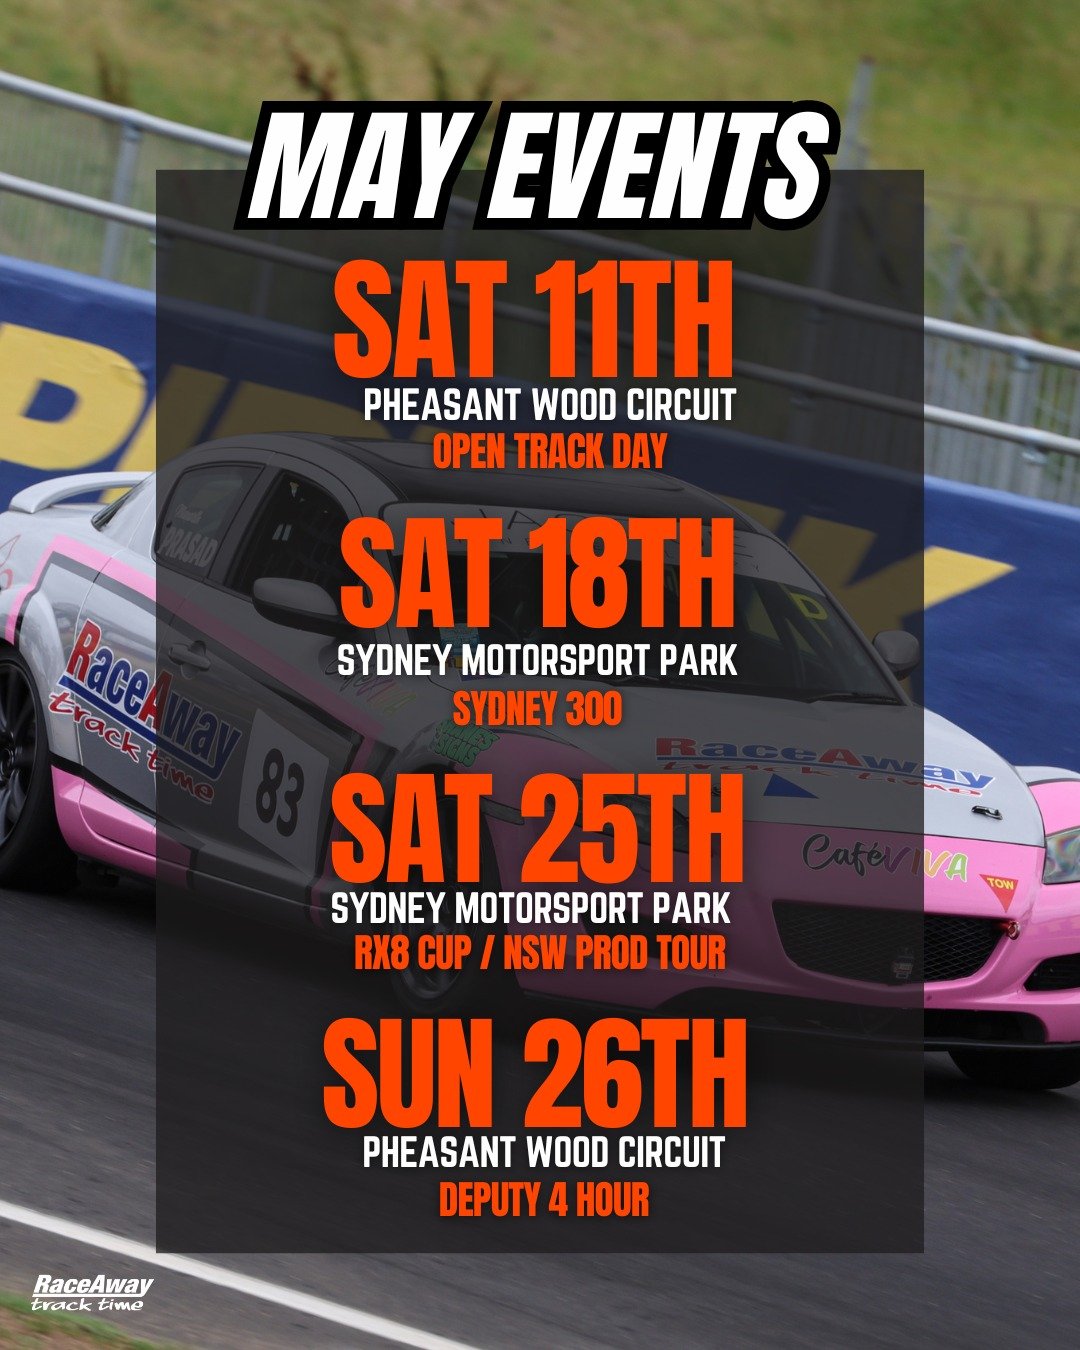 📣Get PUMPED for a jam packed May with seats available for newcomers and seasoned drivers ❤️&zwj;🔥

⏩Newcomers - Jump on track at our upcoming track day. BYO car or hire a race car! Want to get racing? Seats available for R4 of Deputy 4 Hour. Door-t